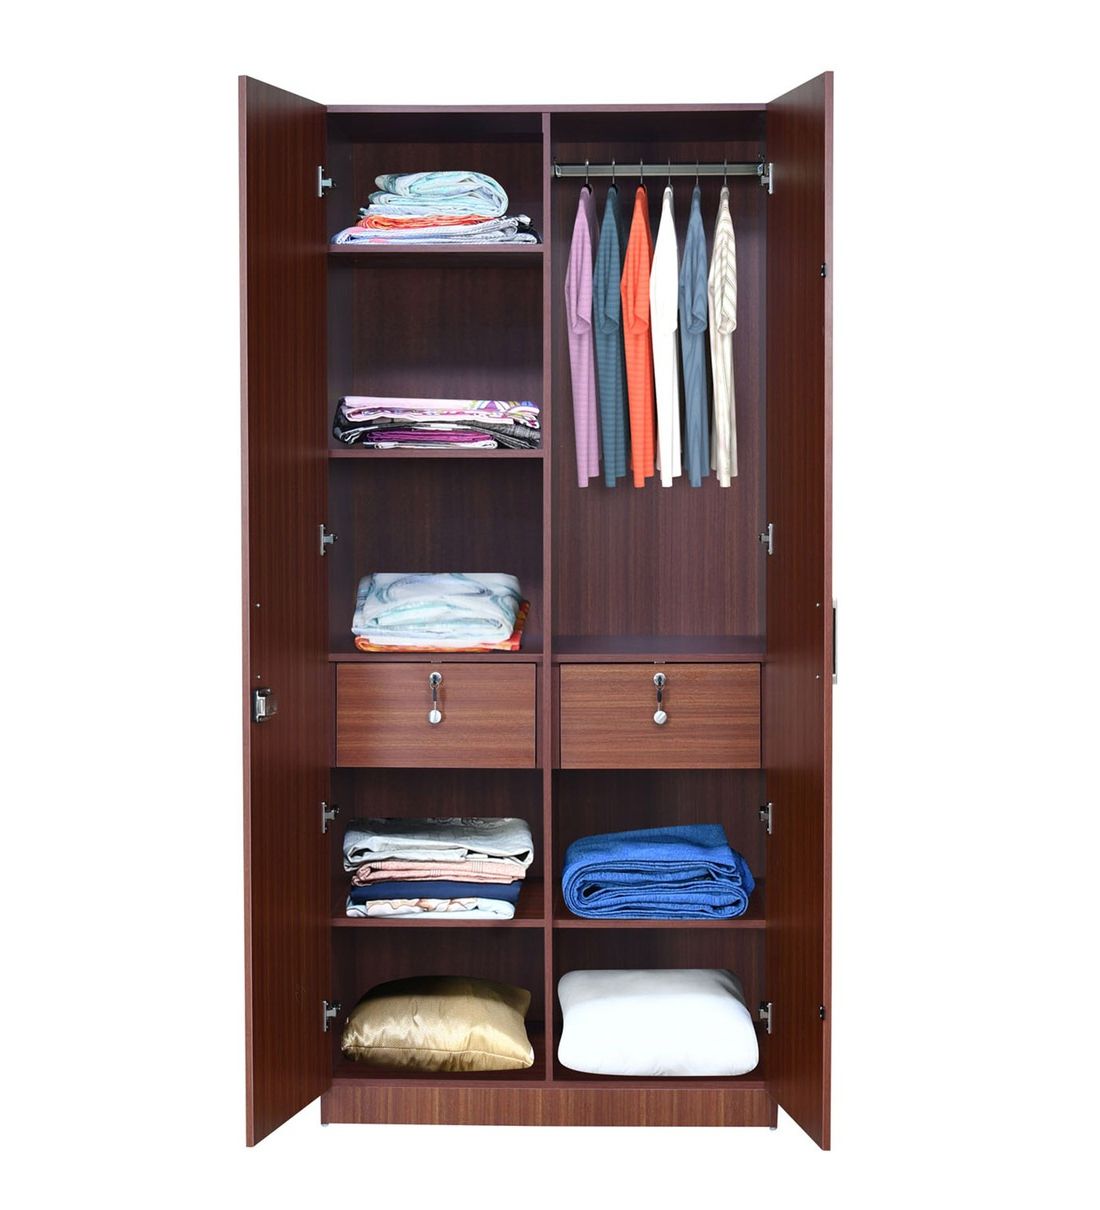 Buy Amelia 2 Door Wardrobe In Espresso Colour At 64% Off@home |  Pepperfry Throughout Espresso Wardrobes (View 9 of 20)